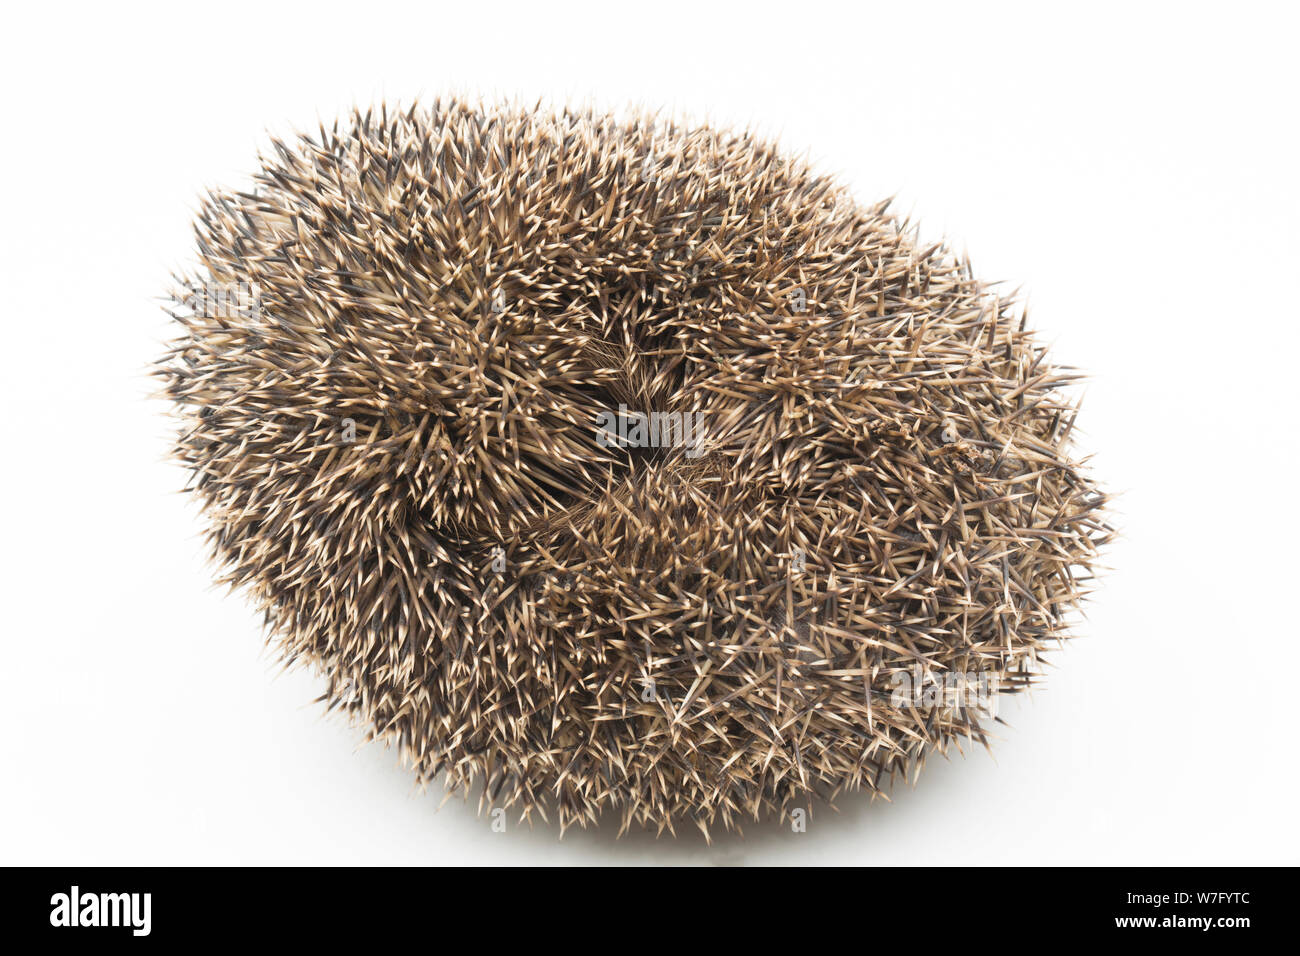 A hedgehog, Erinaceus europaeus, curled in a ball and photographed on a white background. Hedgehogs have suffered a considerable decline in their numb Stock Photo